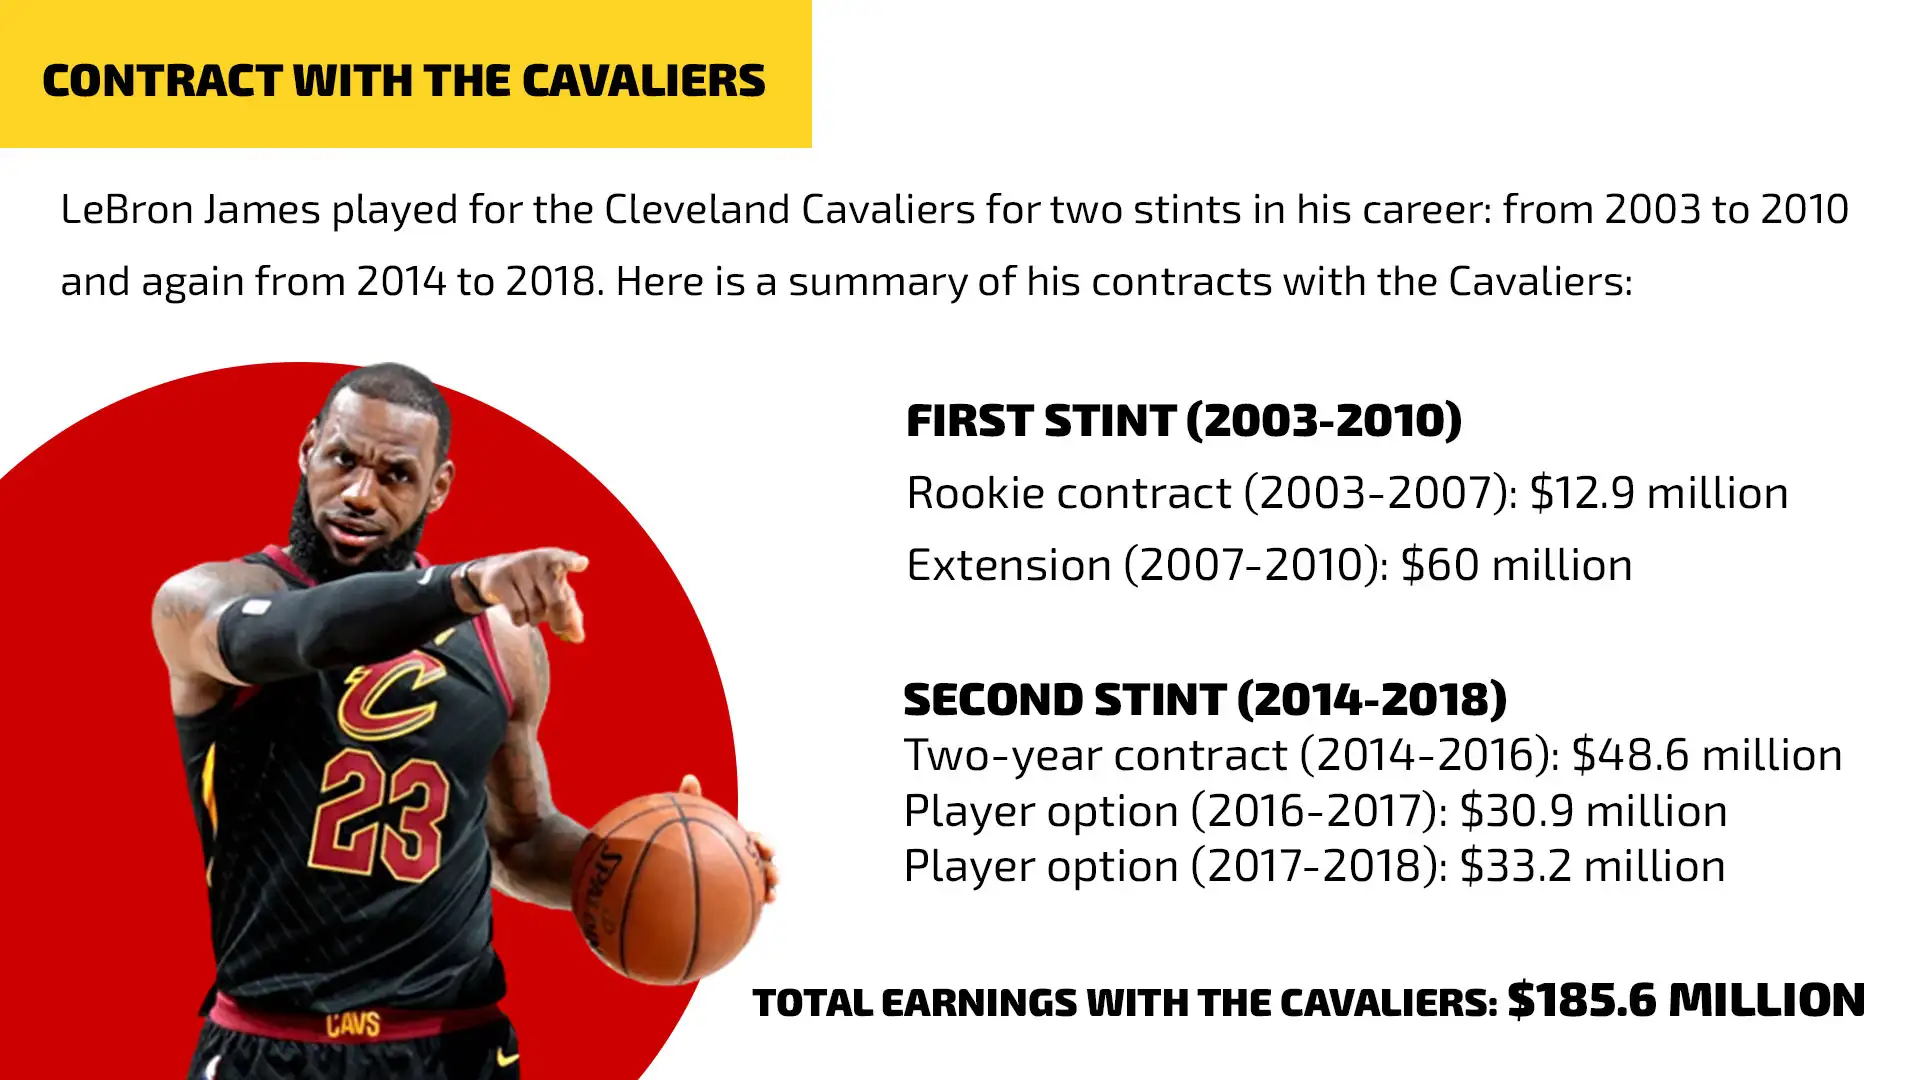 LeBron James’ contract with the Cavaliers